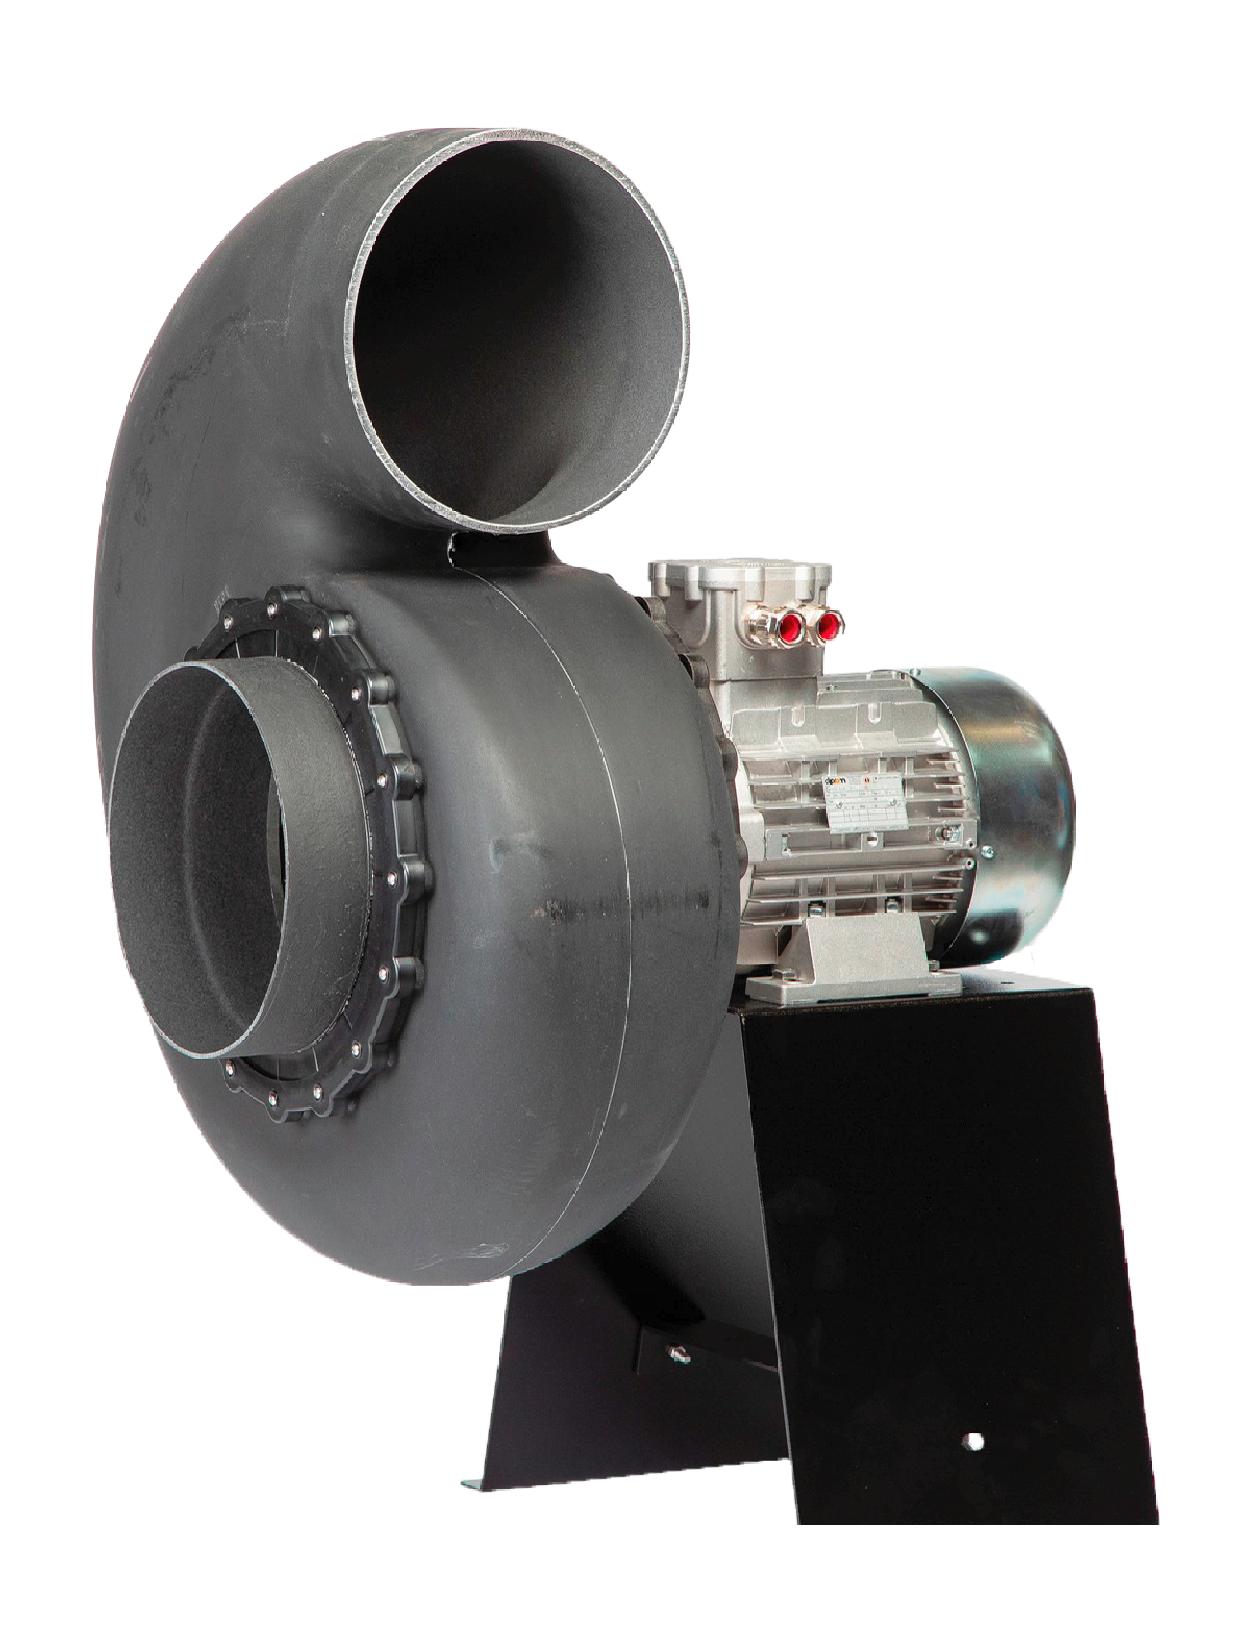 Plastec 35 Direct Drive Forward Curve Polypropylene Blower - XP for exhausting fumes from highly corrosive environments